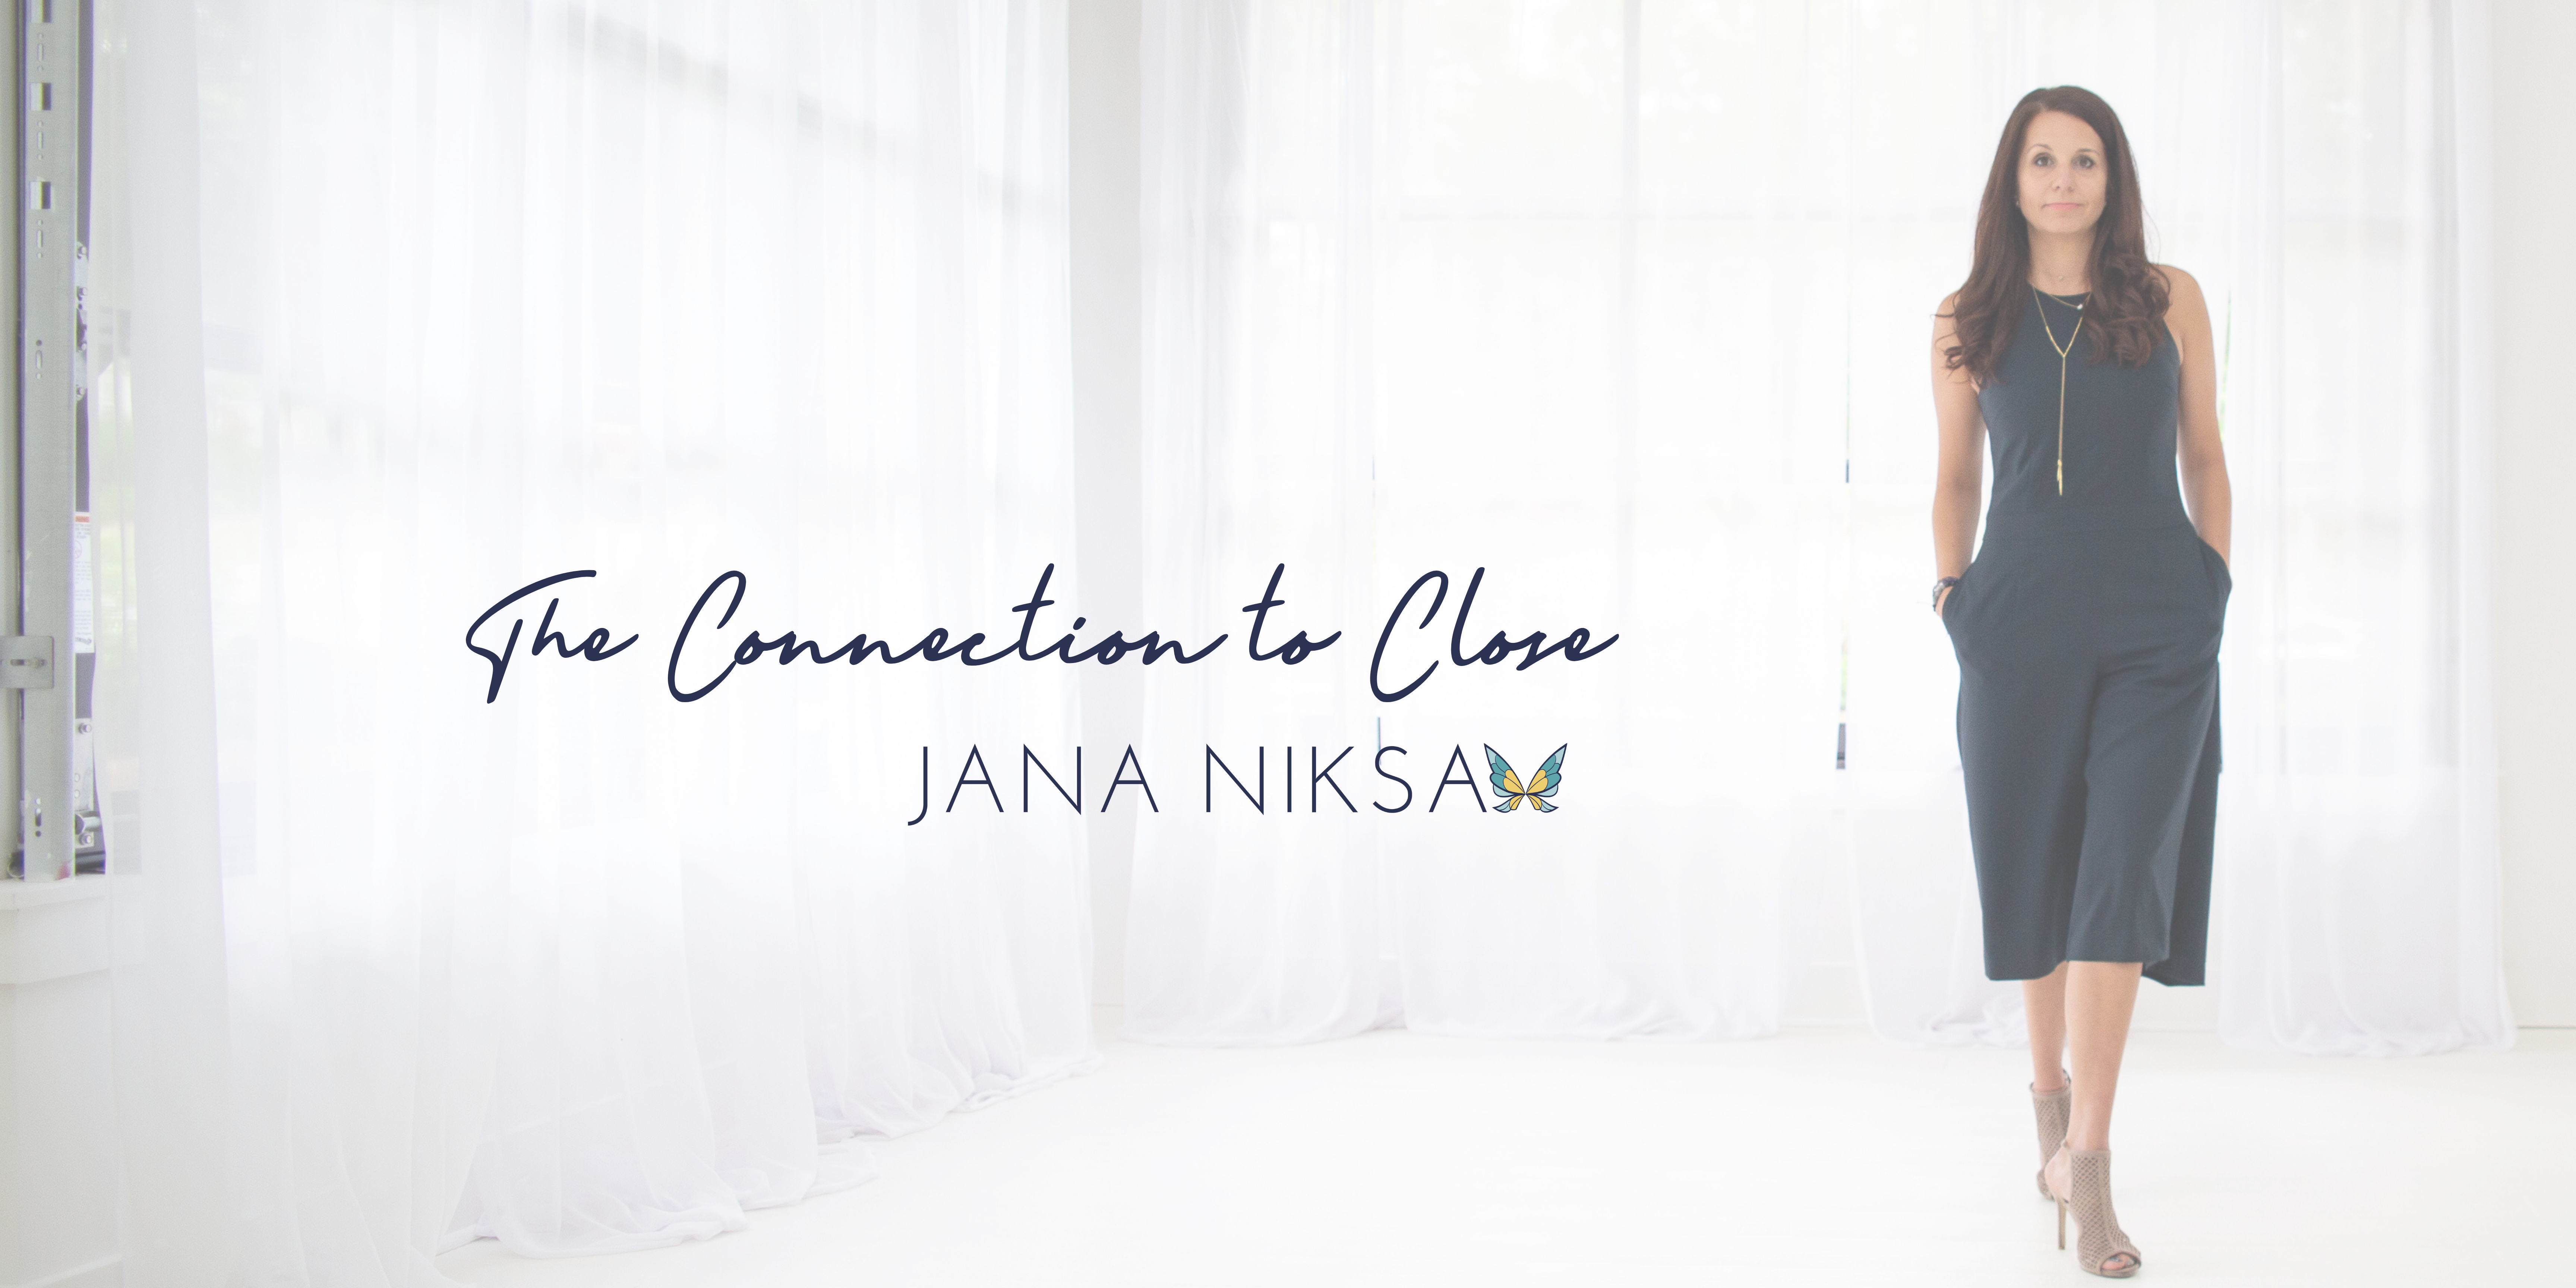 The connection to Close with Jana Niksa